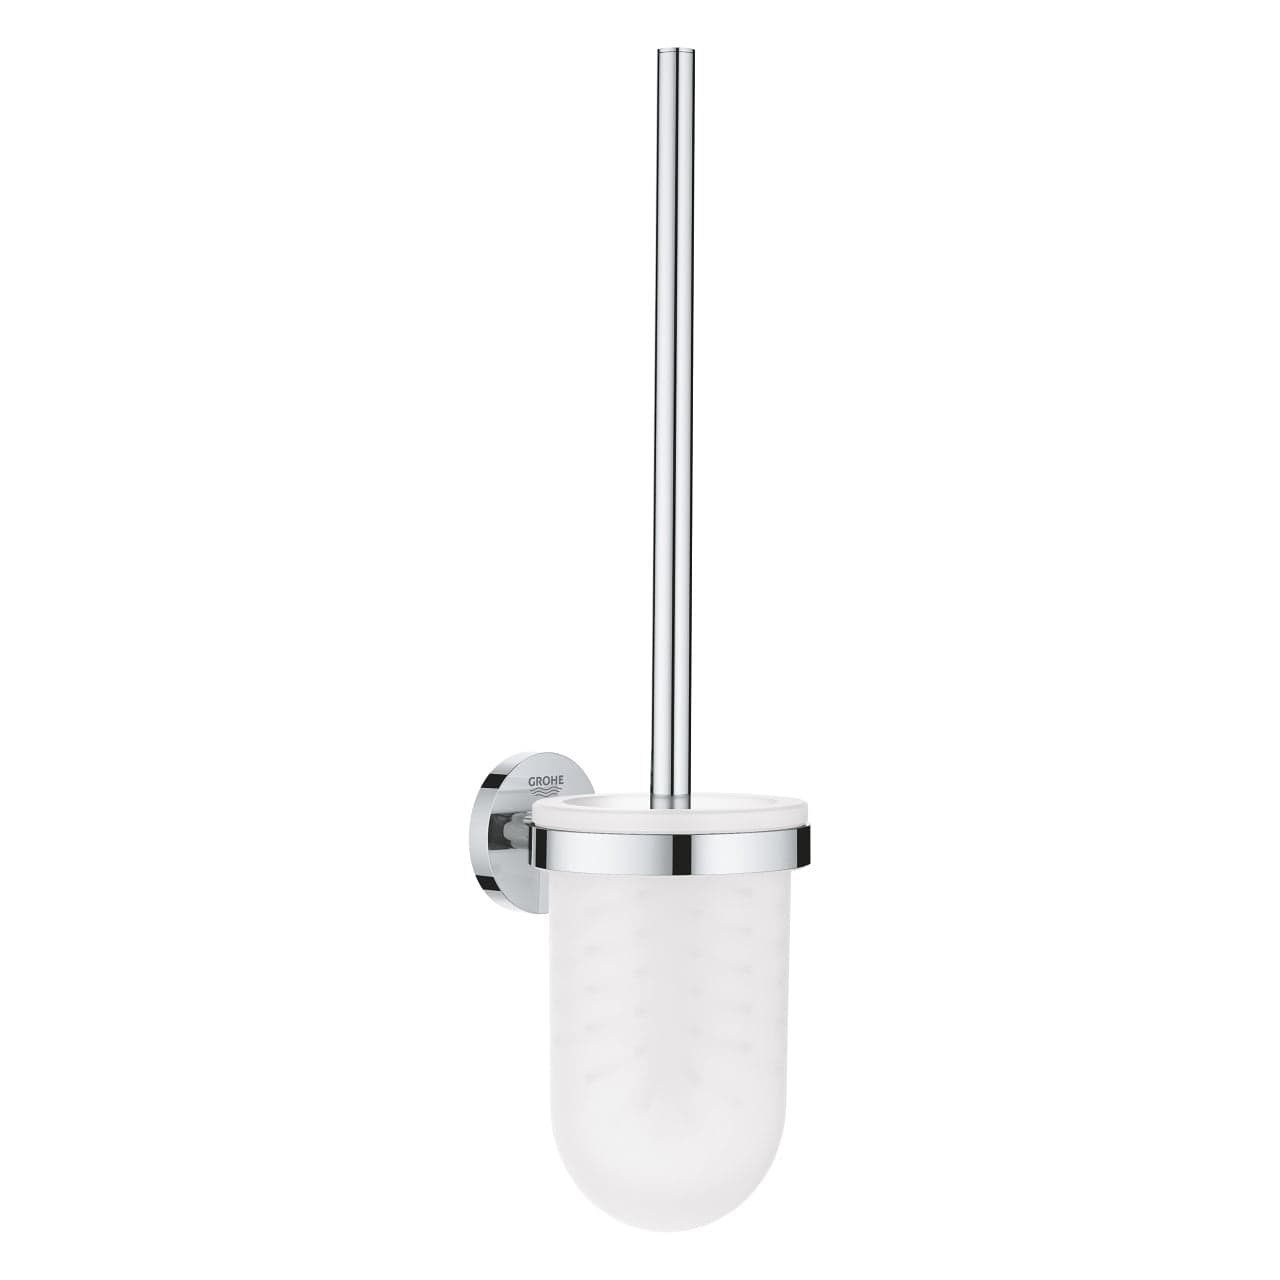 Grohe Essentials Toilet Brush Set - 40374001 | Supply Master | Accra, Ghana Bathroom Accessories Buy Tools hardware Building materials